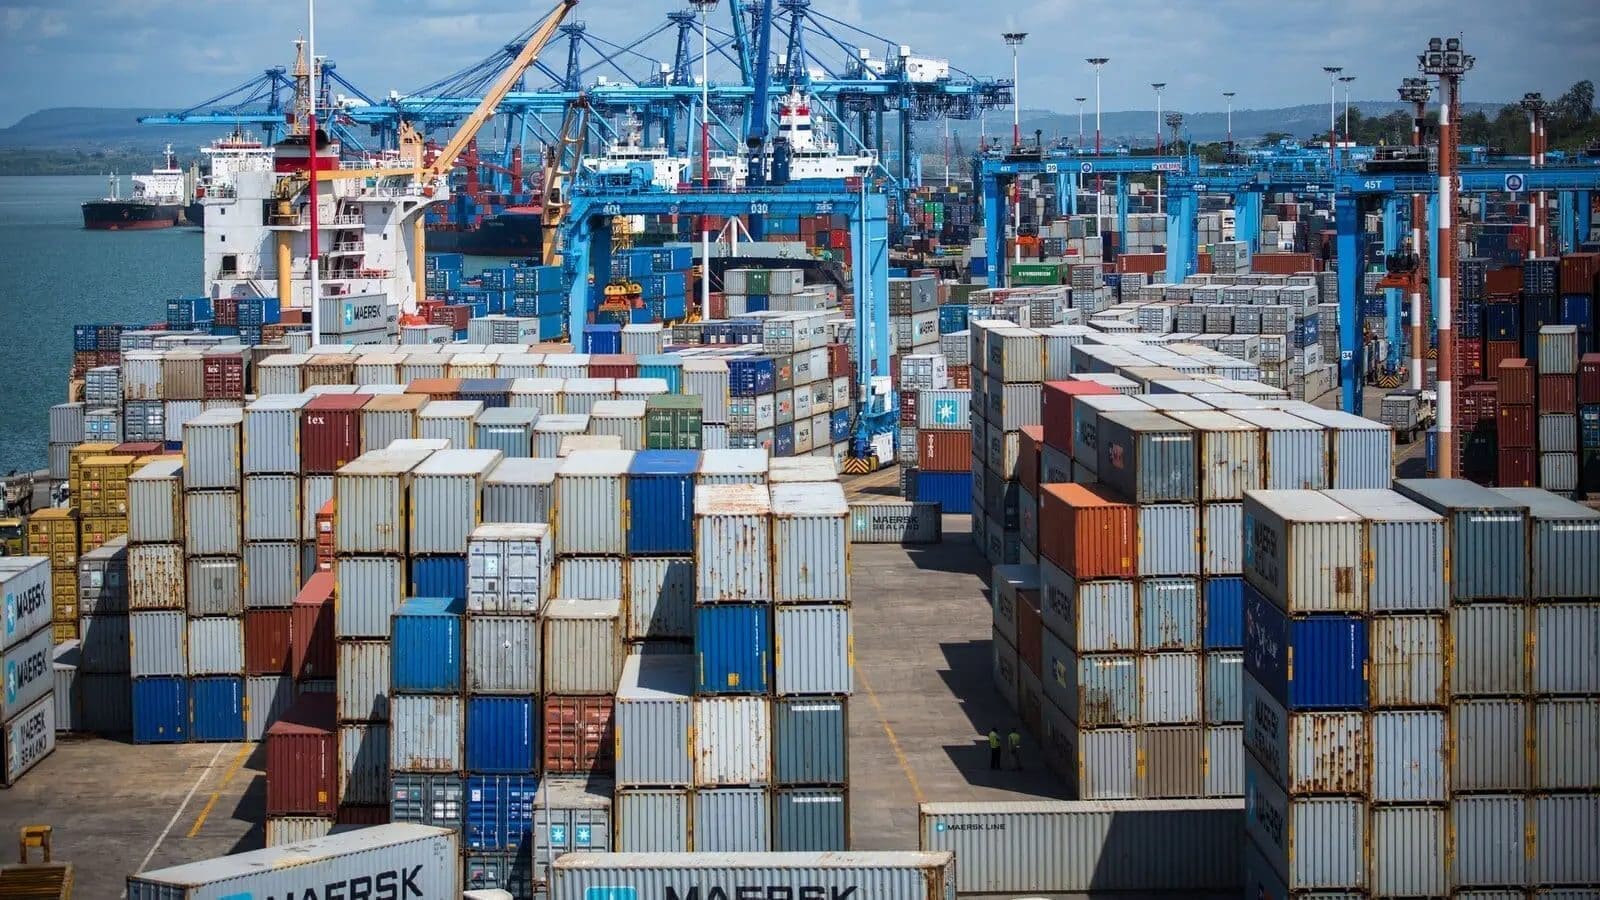 Condemned alcoholic beverages disappearance leaves Mombasa port officials puzzled